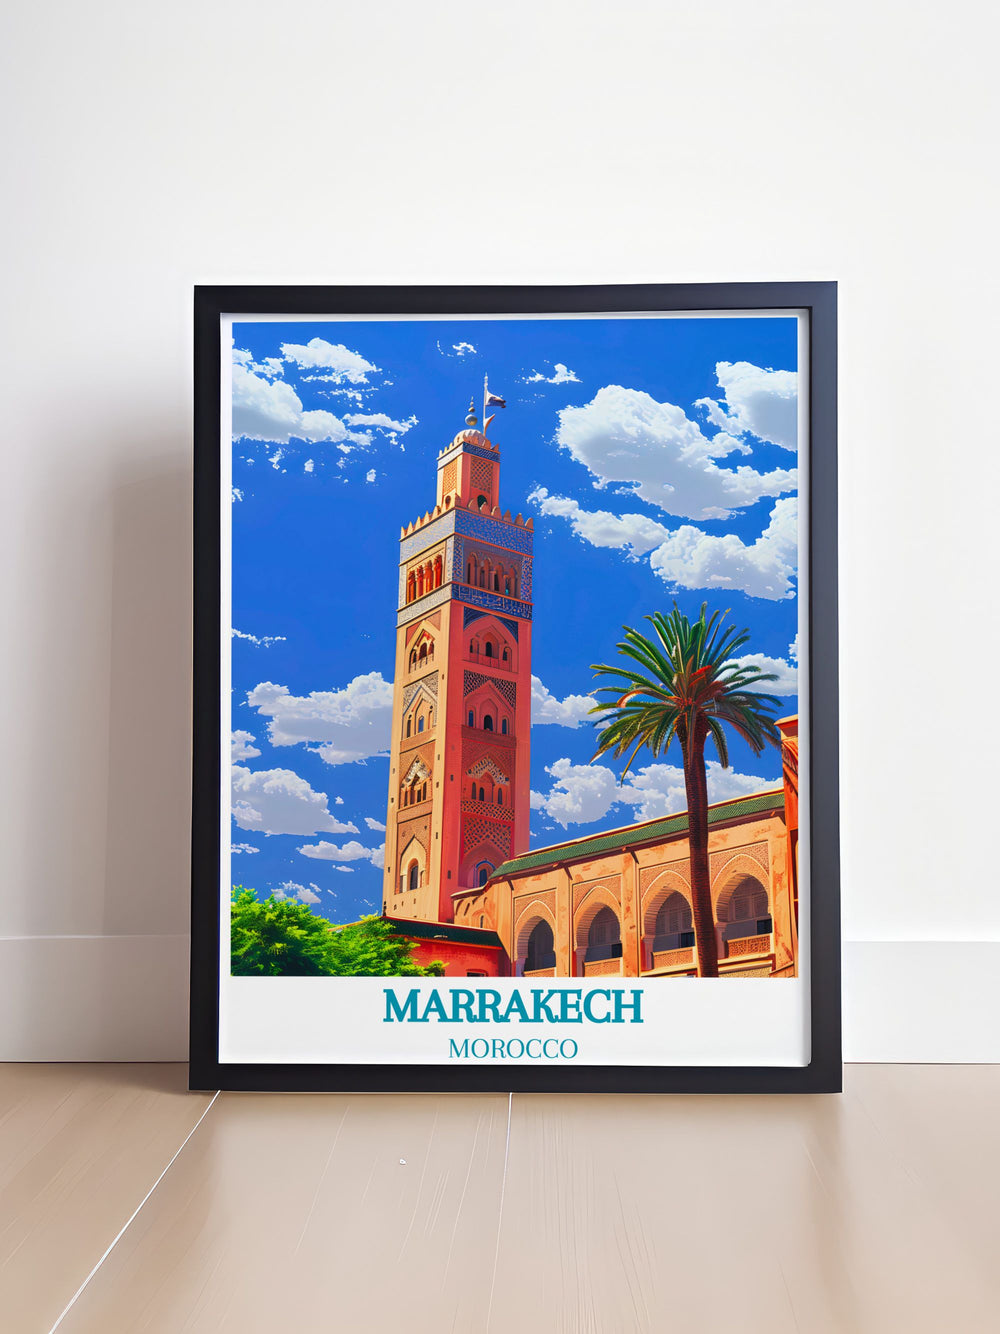 Featuring the iconic landmarks and vibrant atmosphere of Marrakech, this poster showcases the citys inviting landscapes, perfect for those who cherish lively and historic destinations.